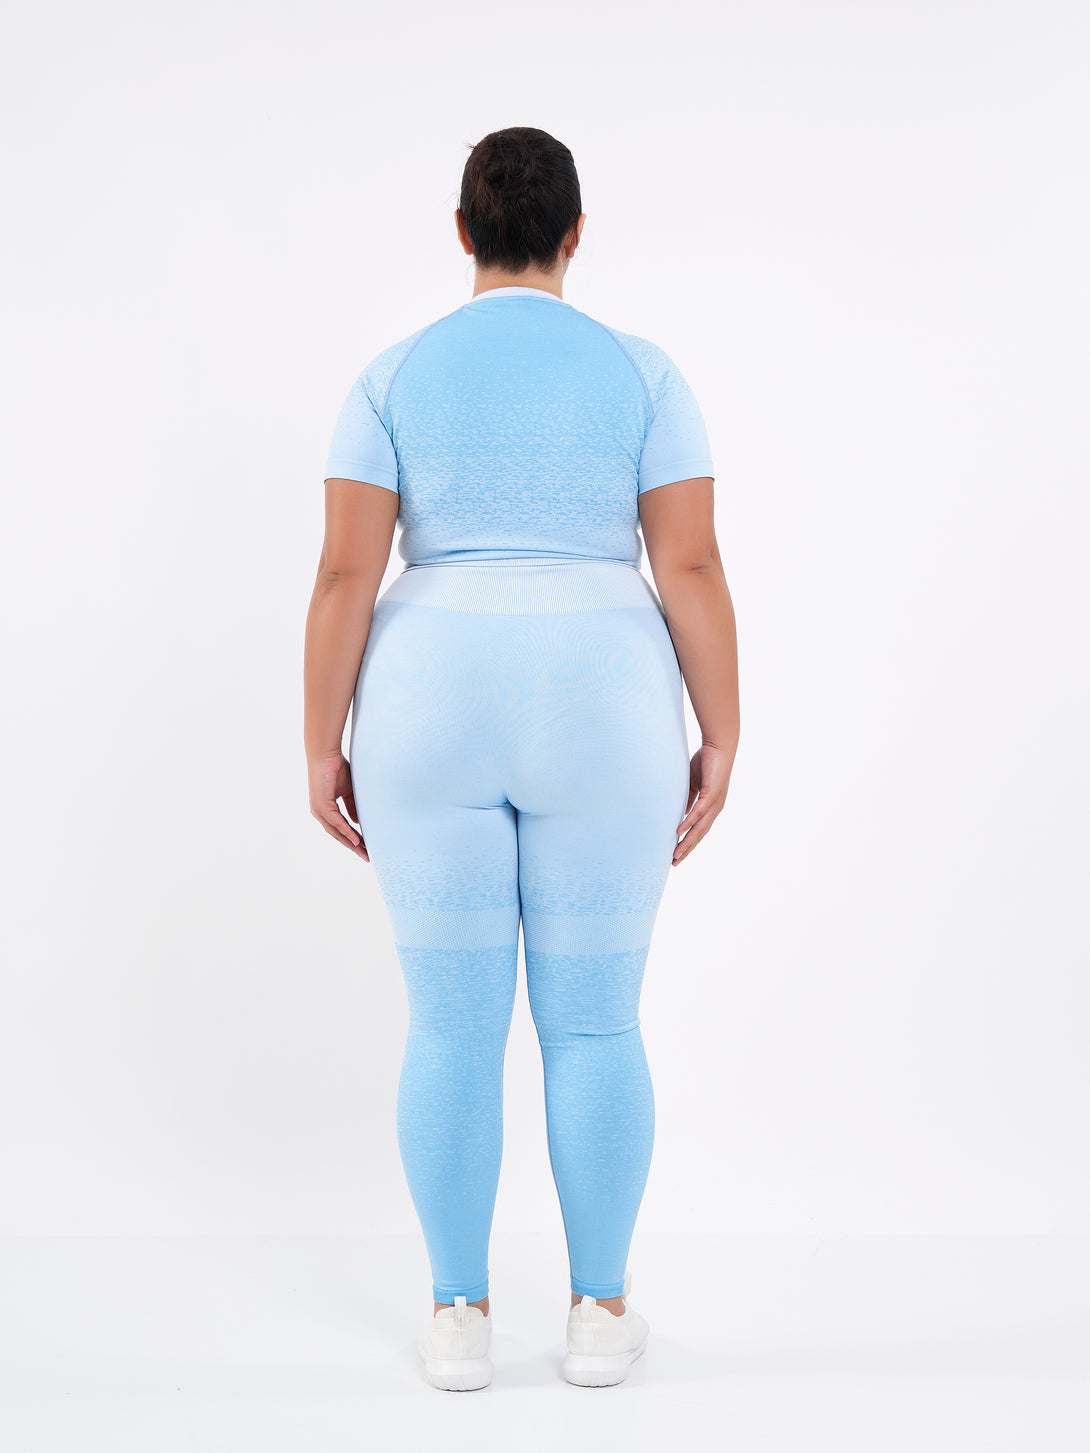 A Women Wearing Sky Blue Color Seamless High-Waist Leggings with Ombre Effect. Chic Comfort